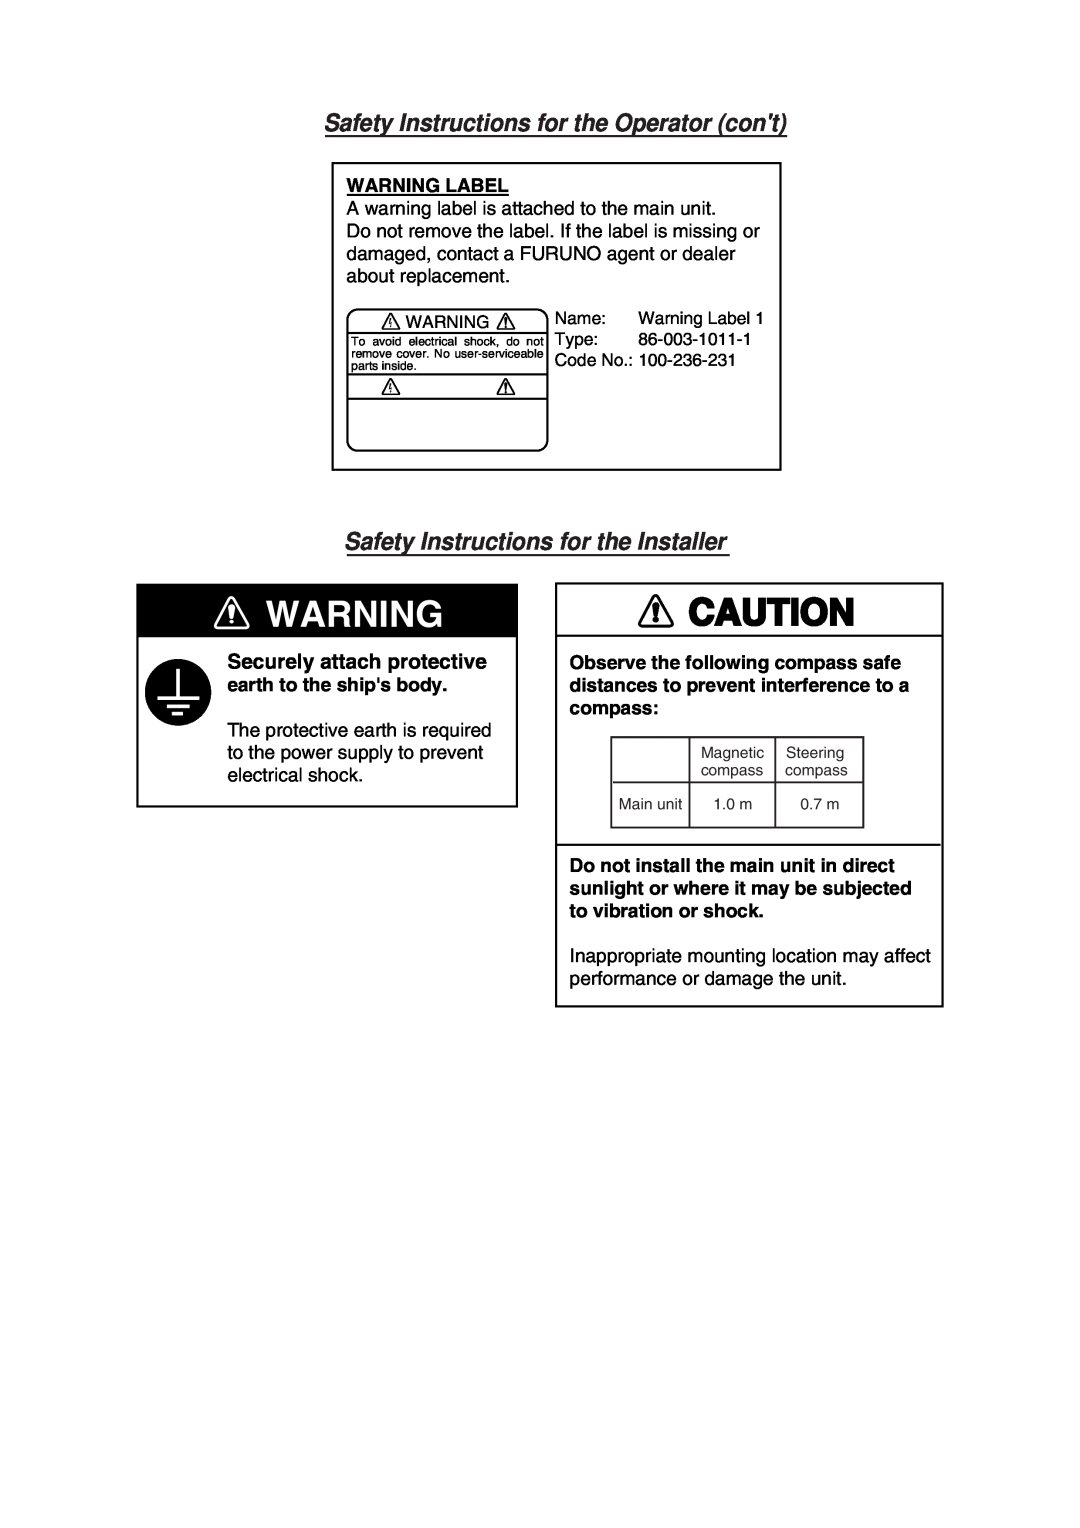 Furuno FAX-410 manual Safety Instructions for the Operator cont, Safety Instructions for the Installer 